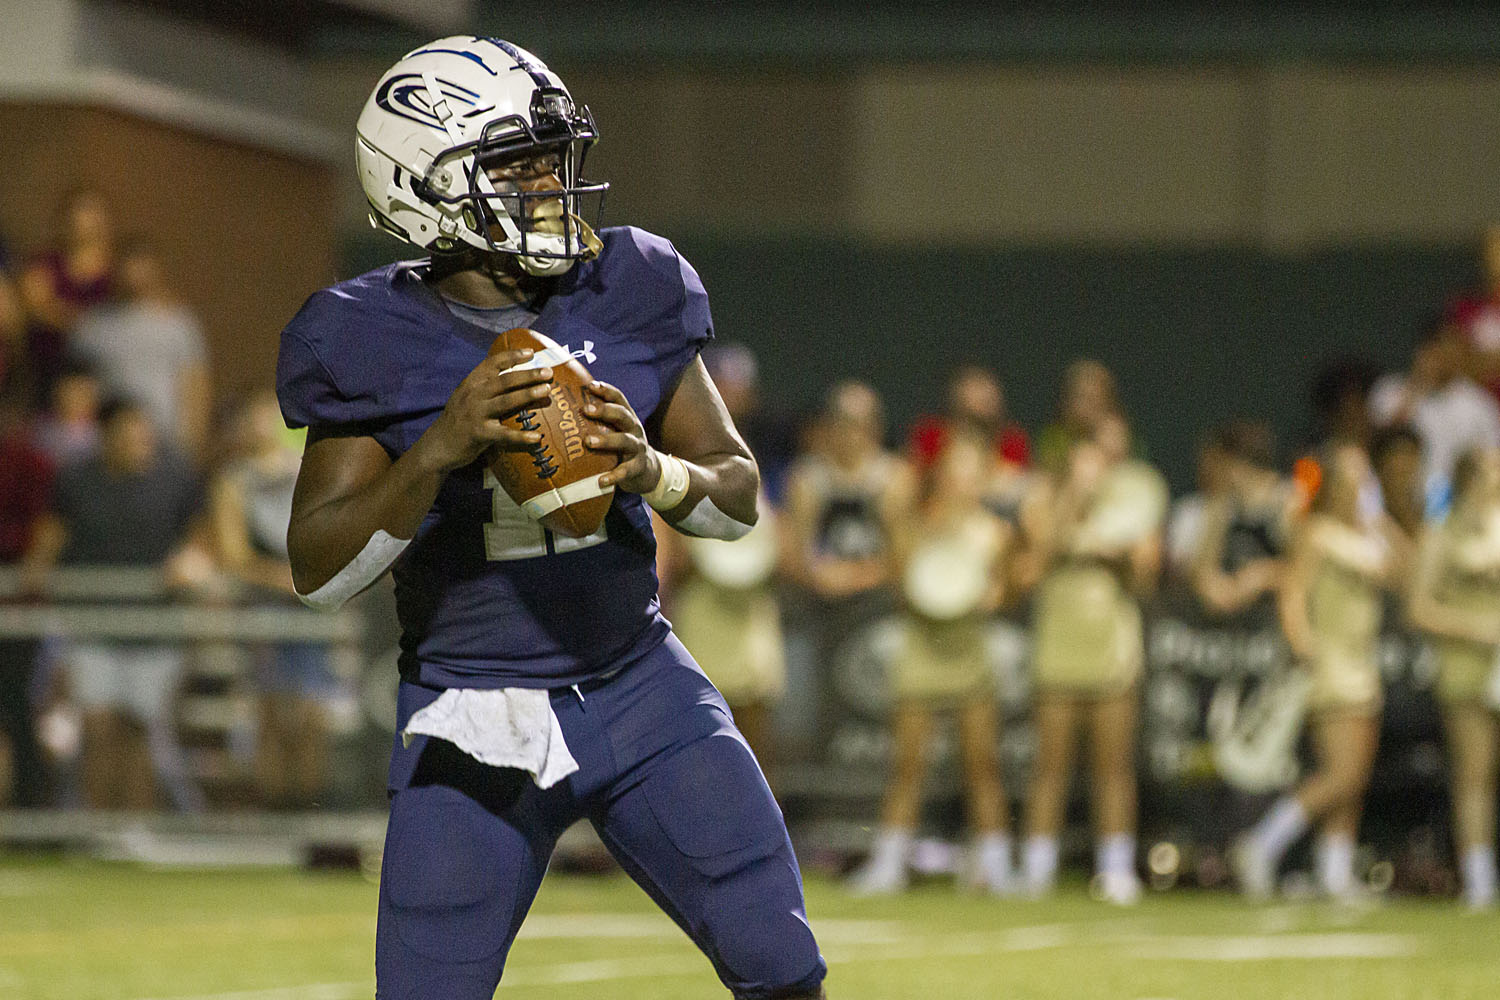 Clay-Chalkville's Damione Ward named OASS Player of the Week